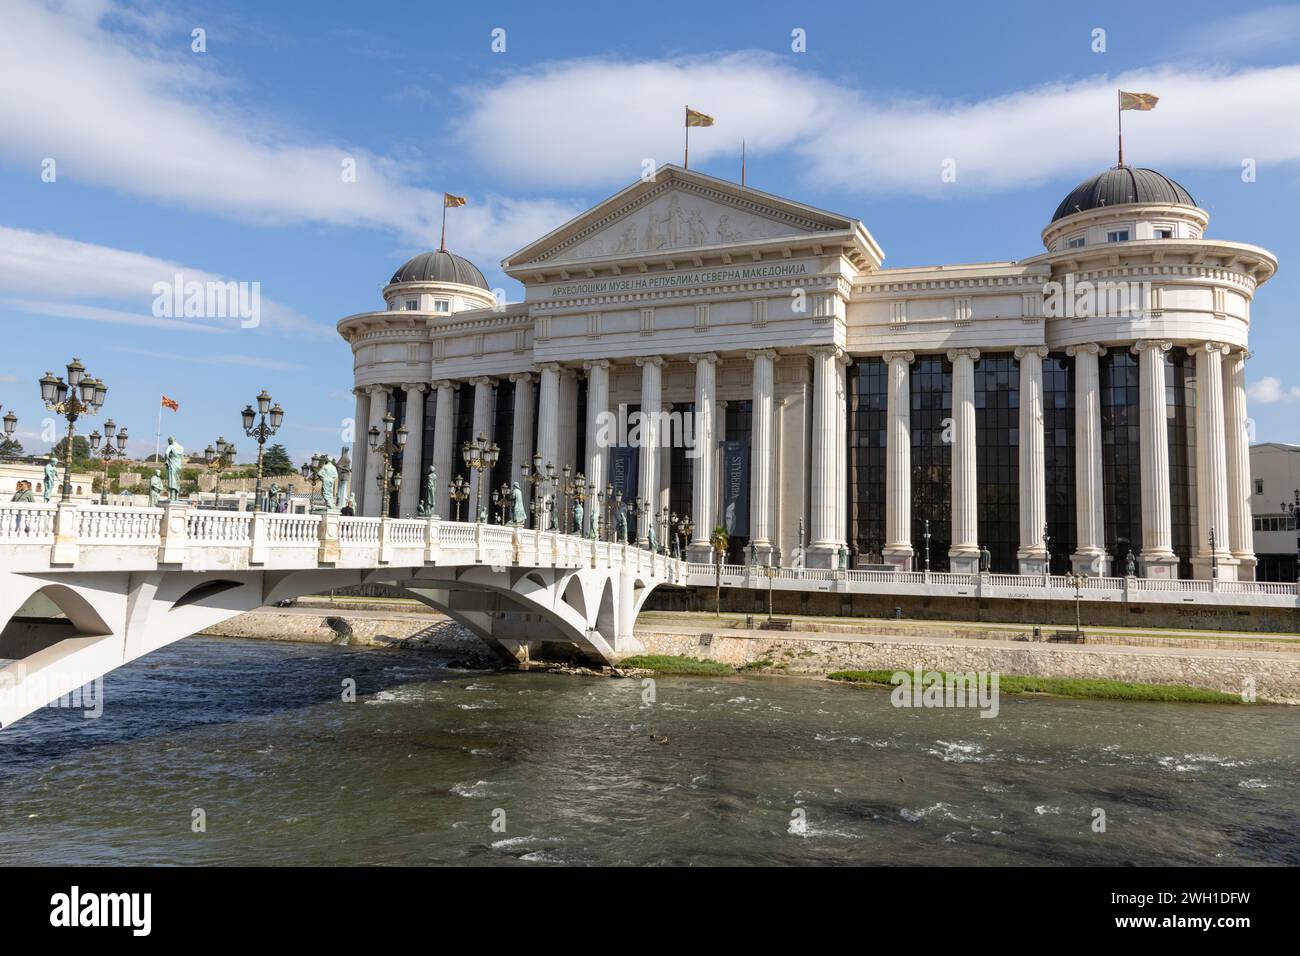 The Archaeological Museum of Macedonia in Skopje, North Macedonia. A new building in classical style, with a new bridge over the Vardar River. Stock Photo